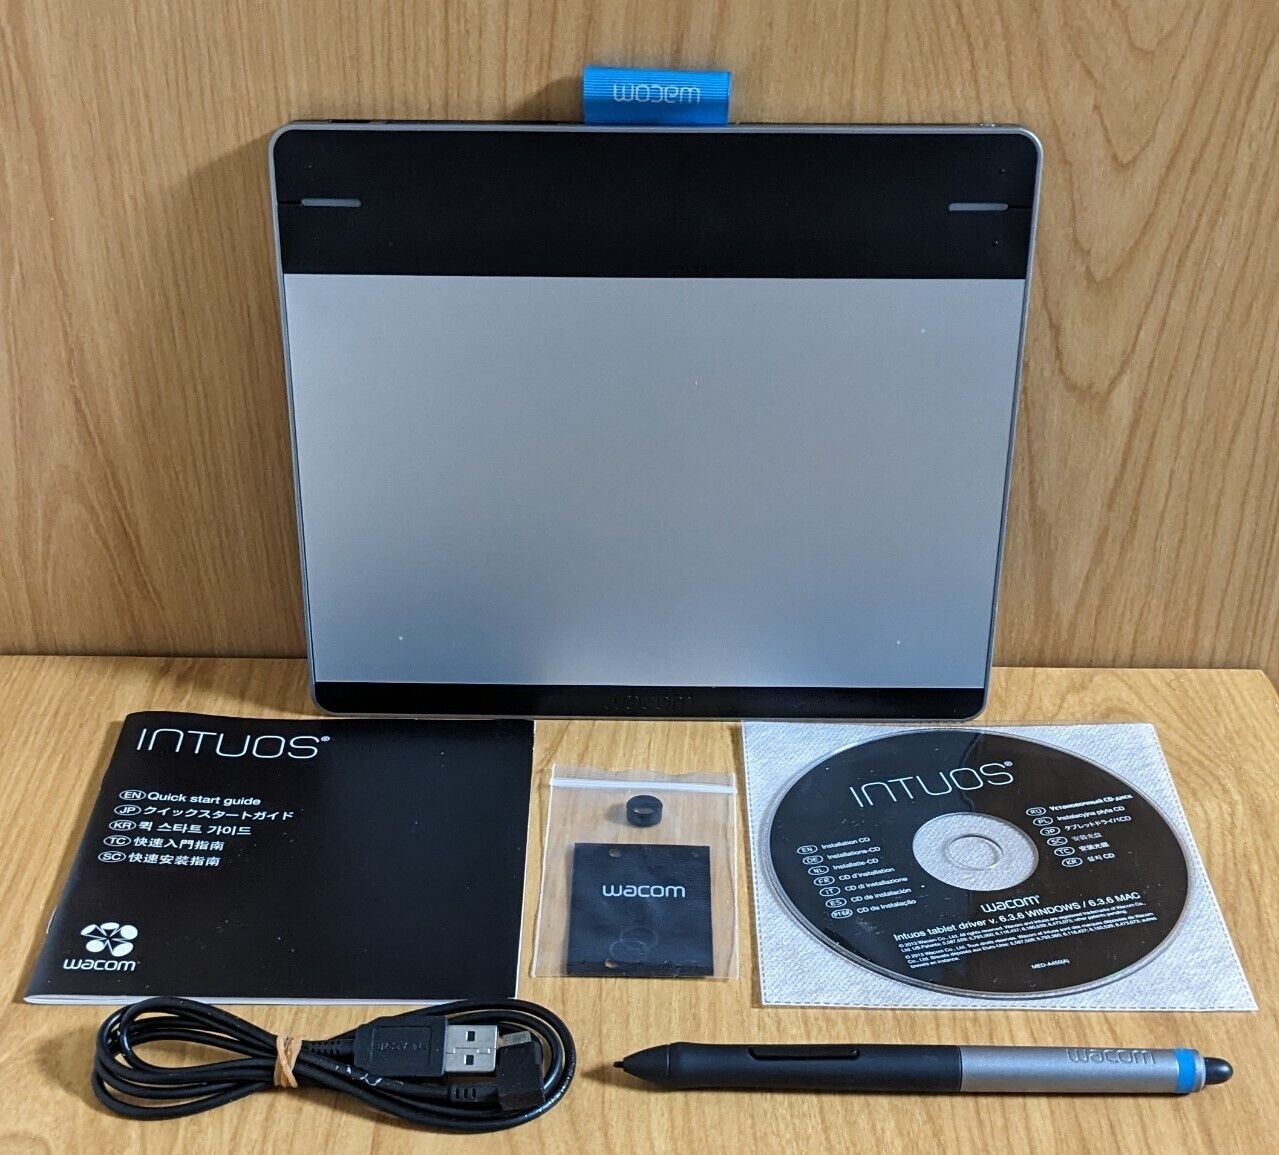 Wacom CTH-480 Intuos Small Creative Pen & Touch Tablet Full set